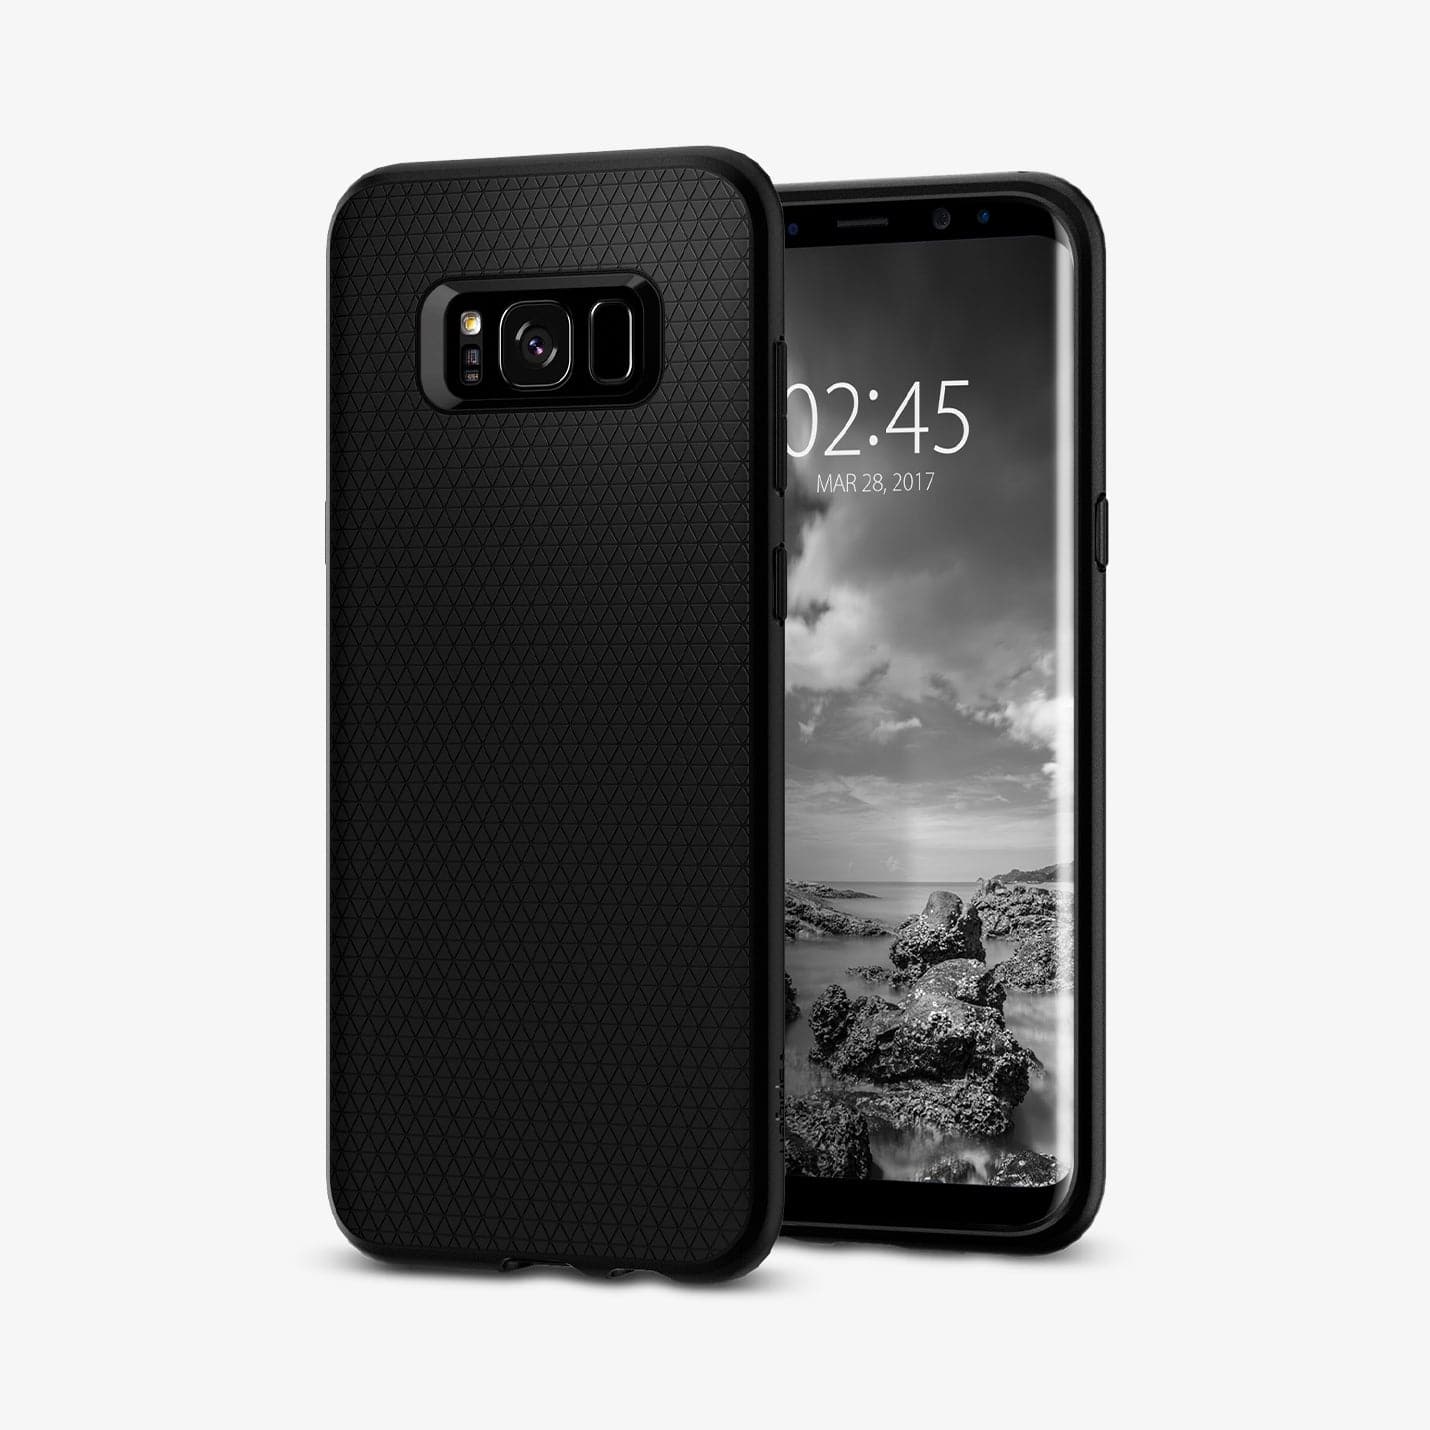 571CS21663 - Galaxy S8 Series Liquid Air Case in black showing the back and front